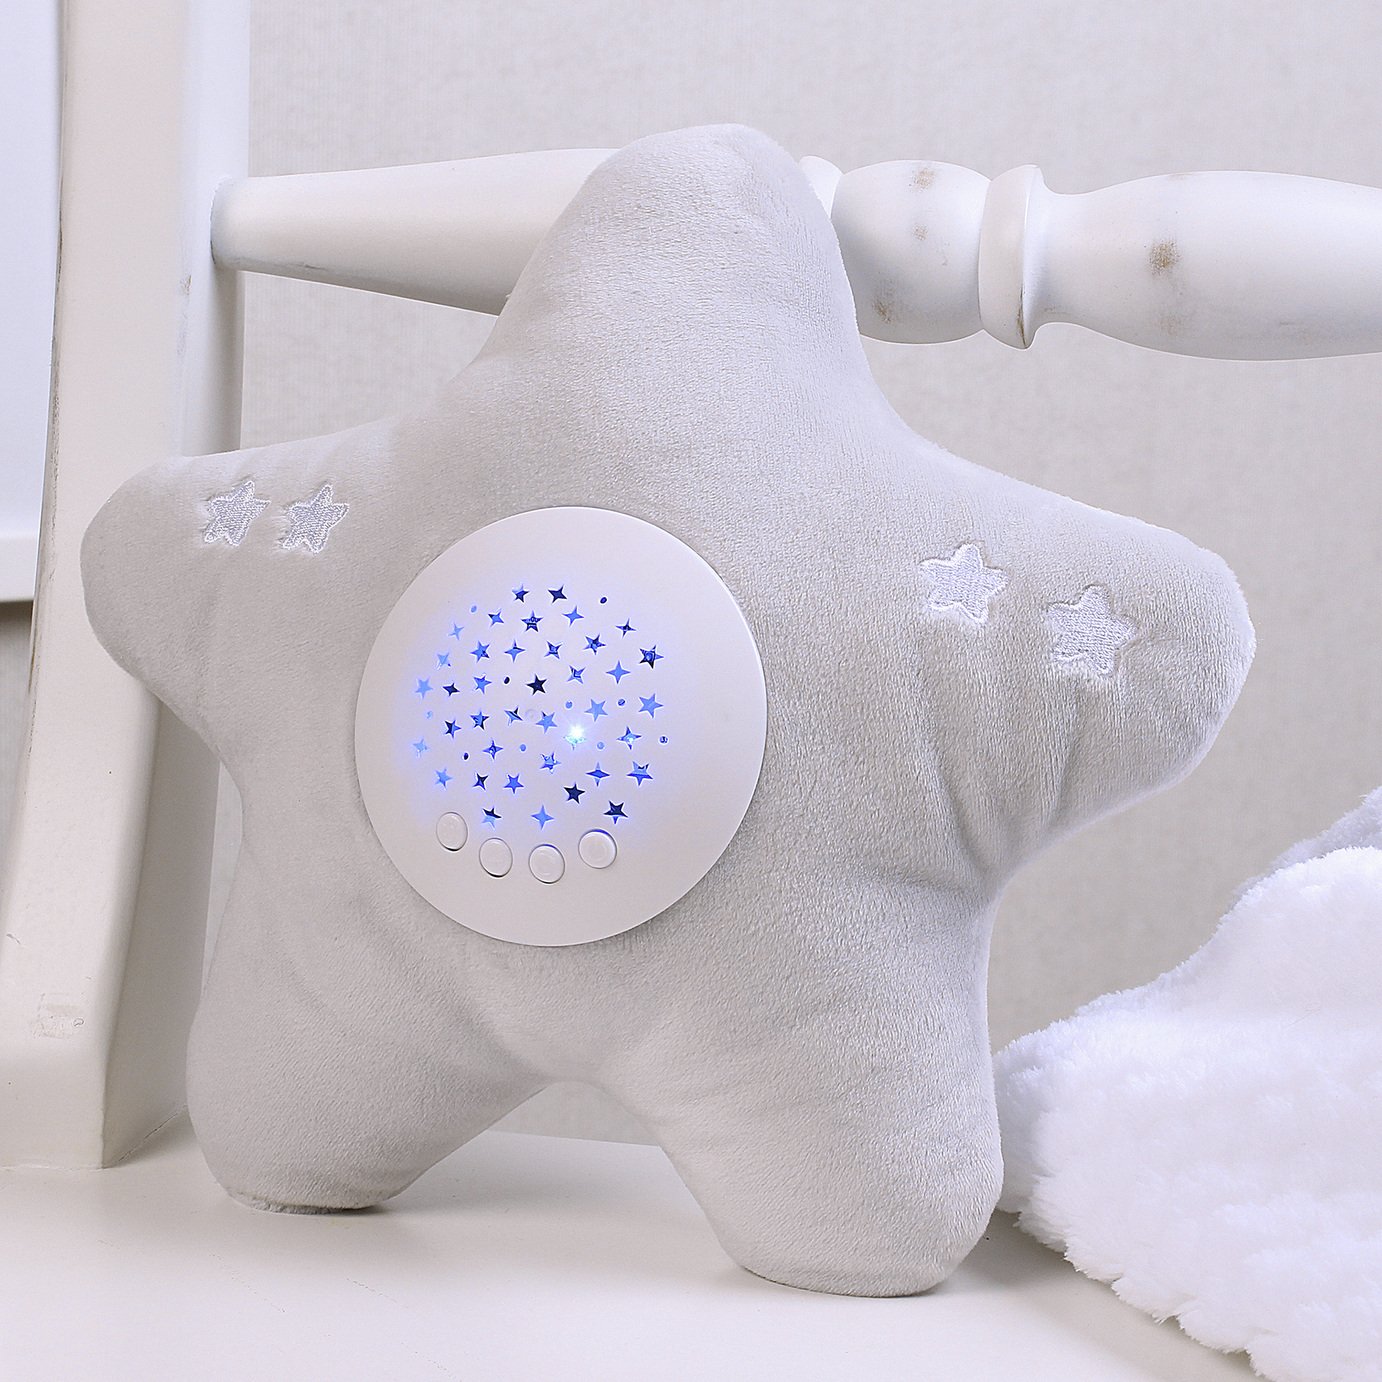 Little Chick Twinkle Night Light Soother Review